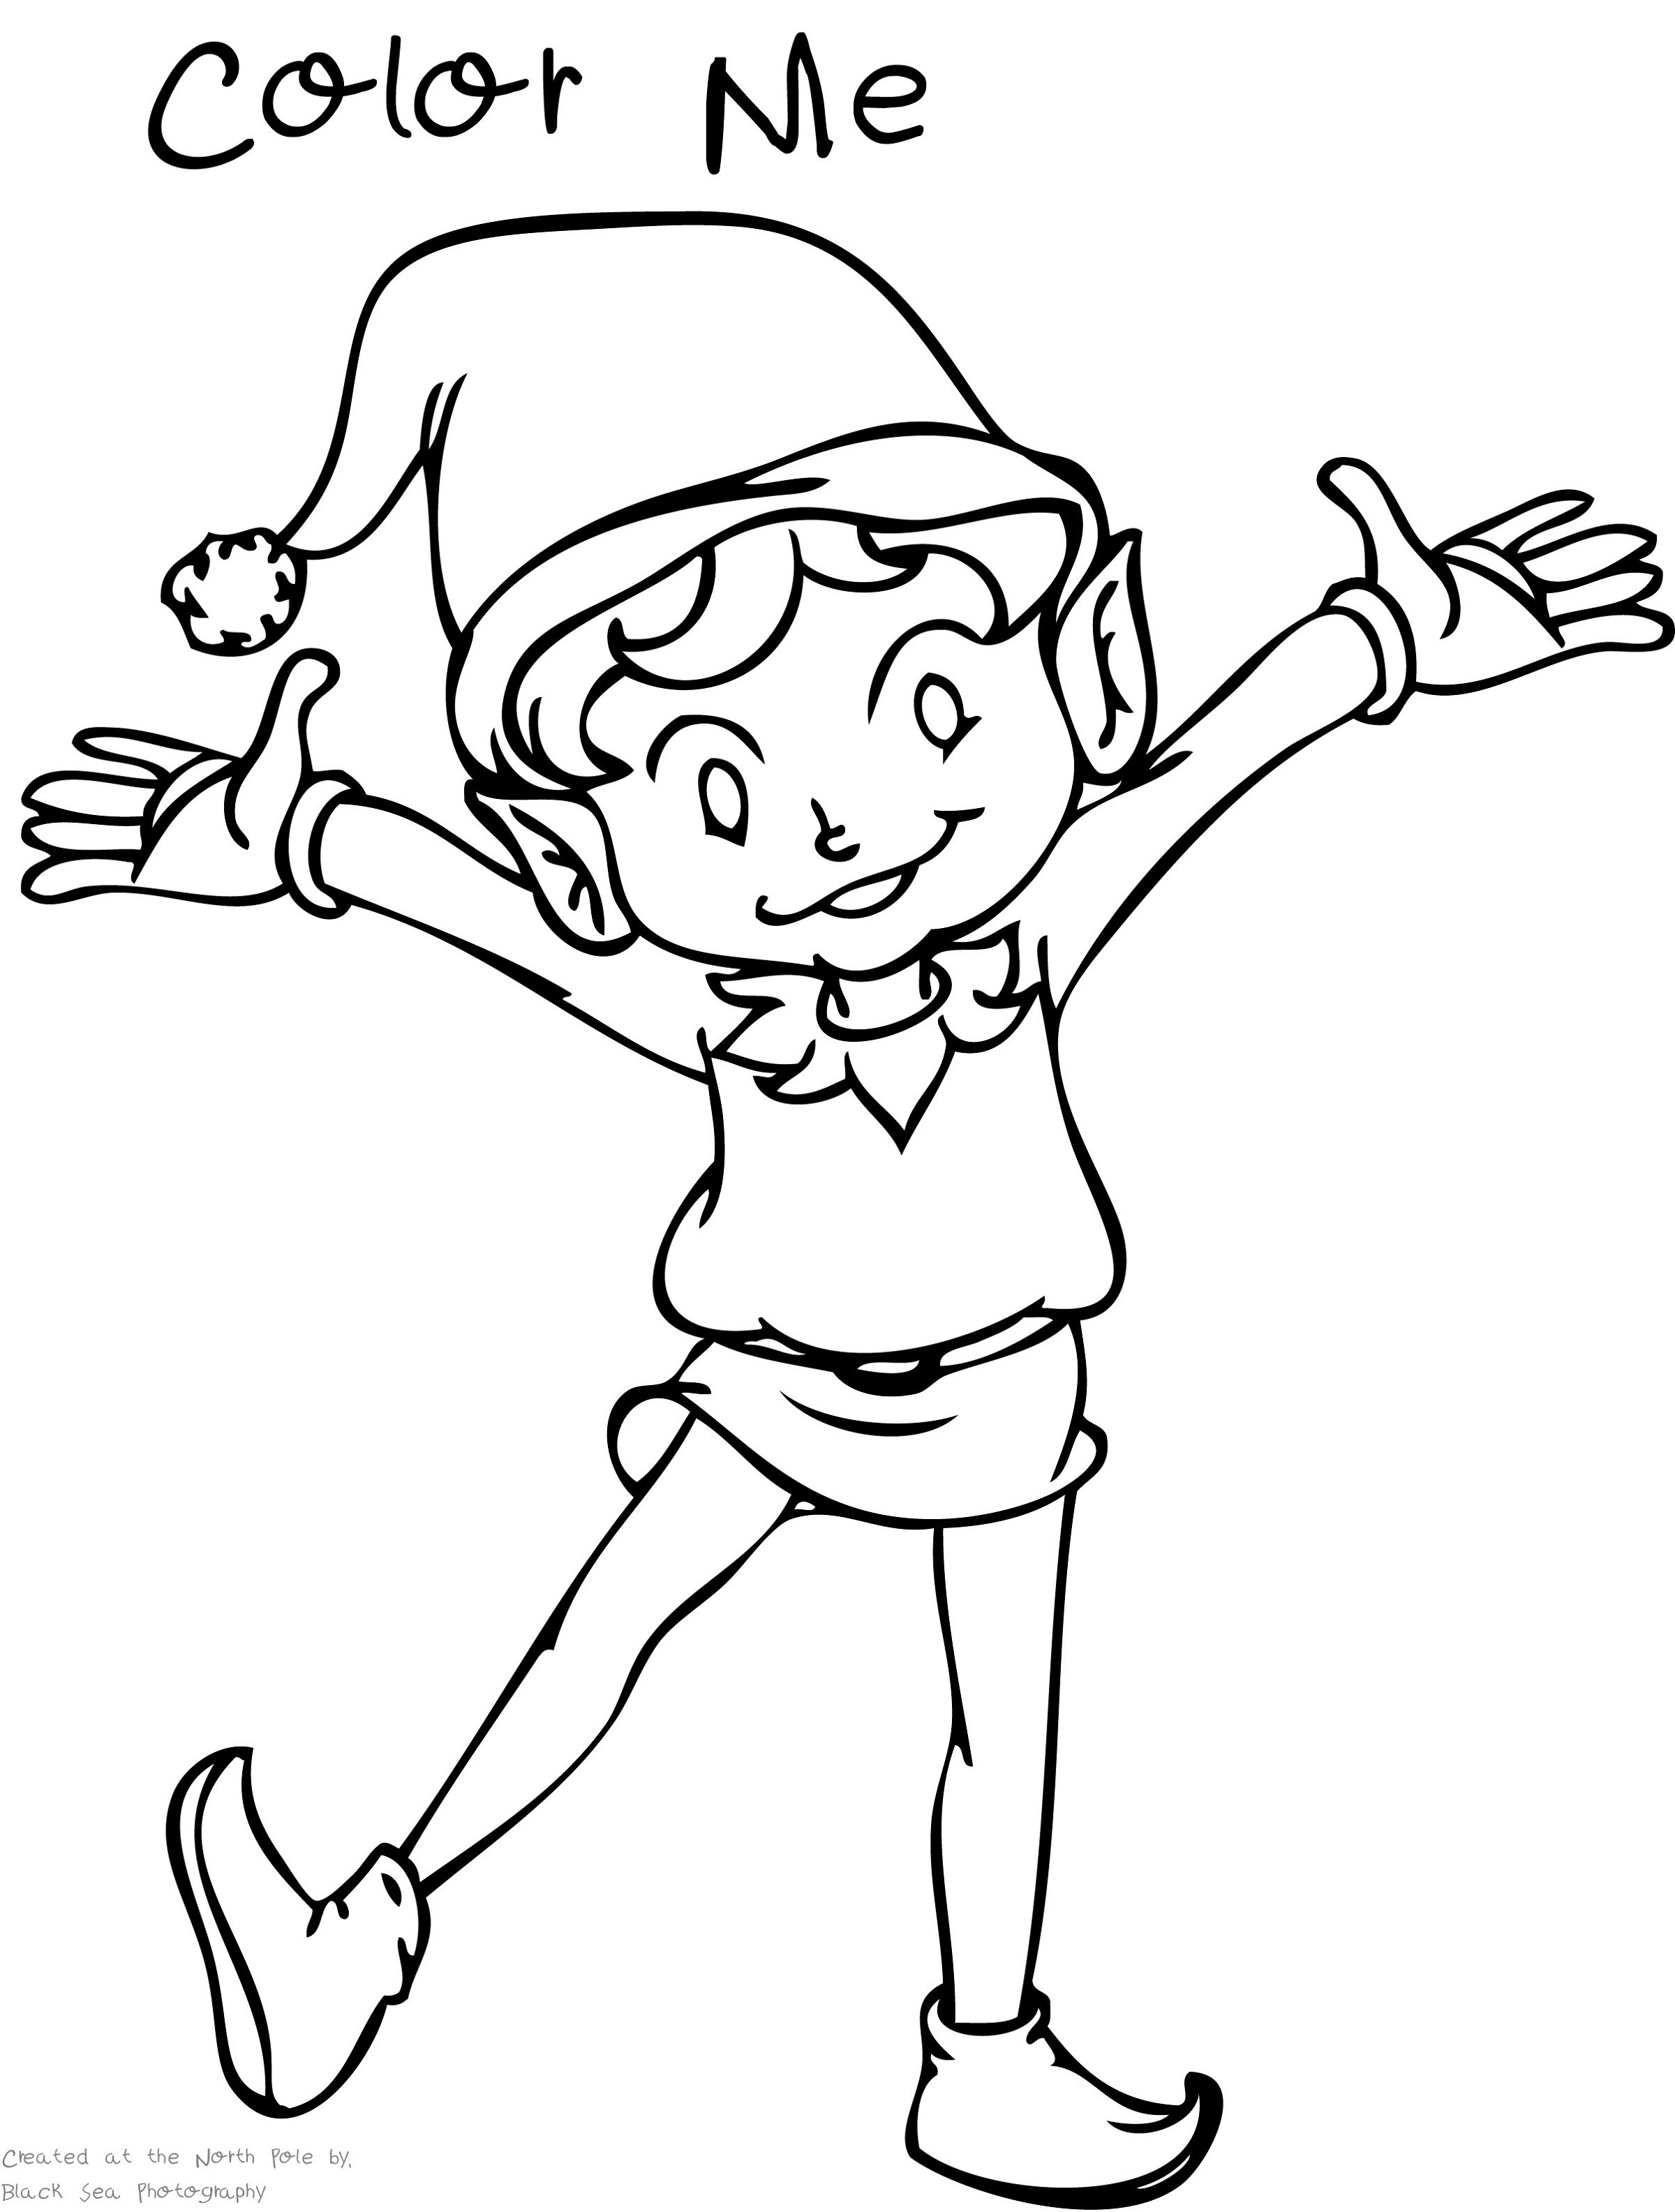 Elf on the Shelf Coloring Sheets | Activity Shelter